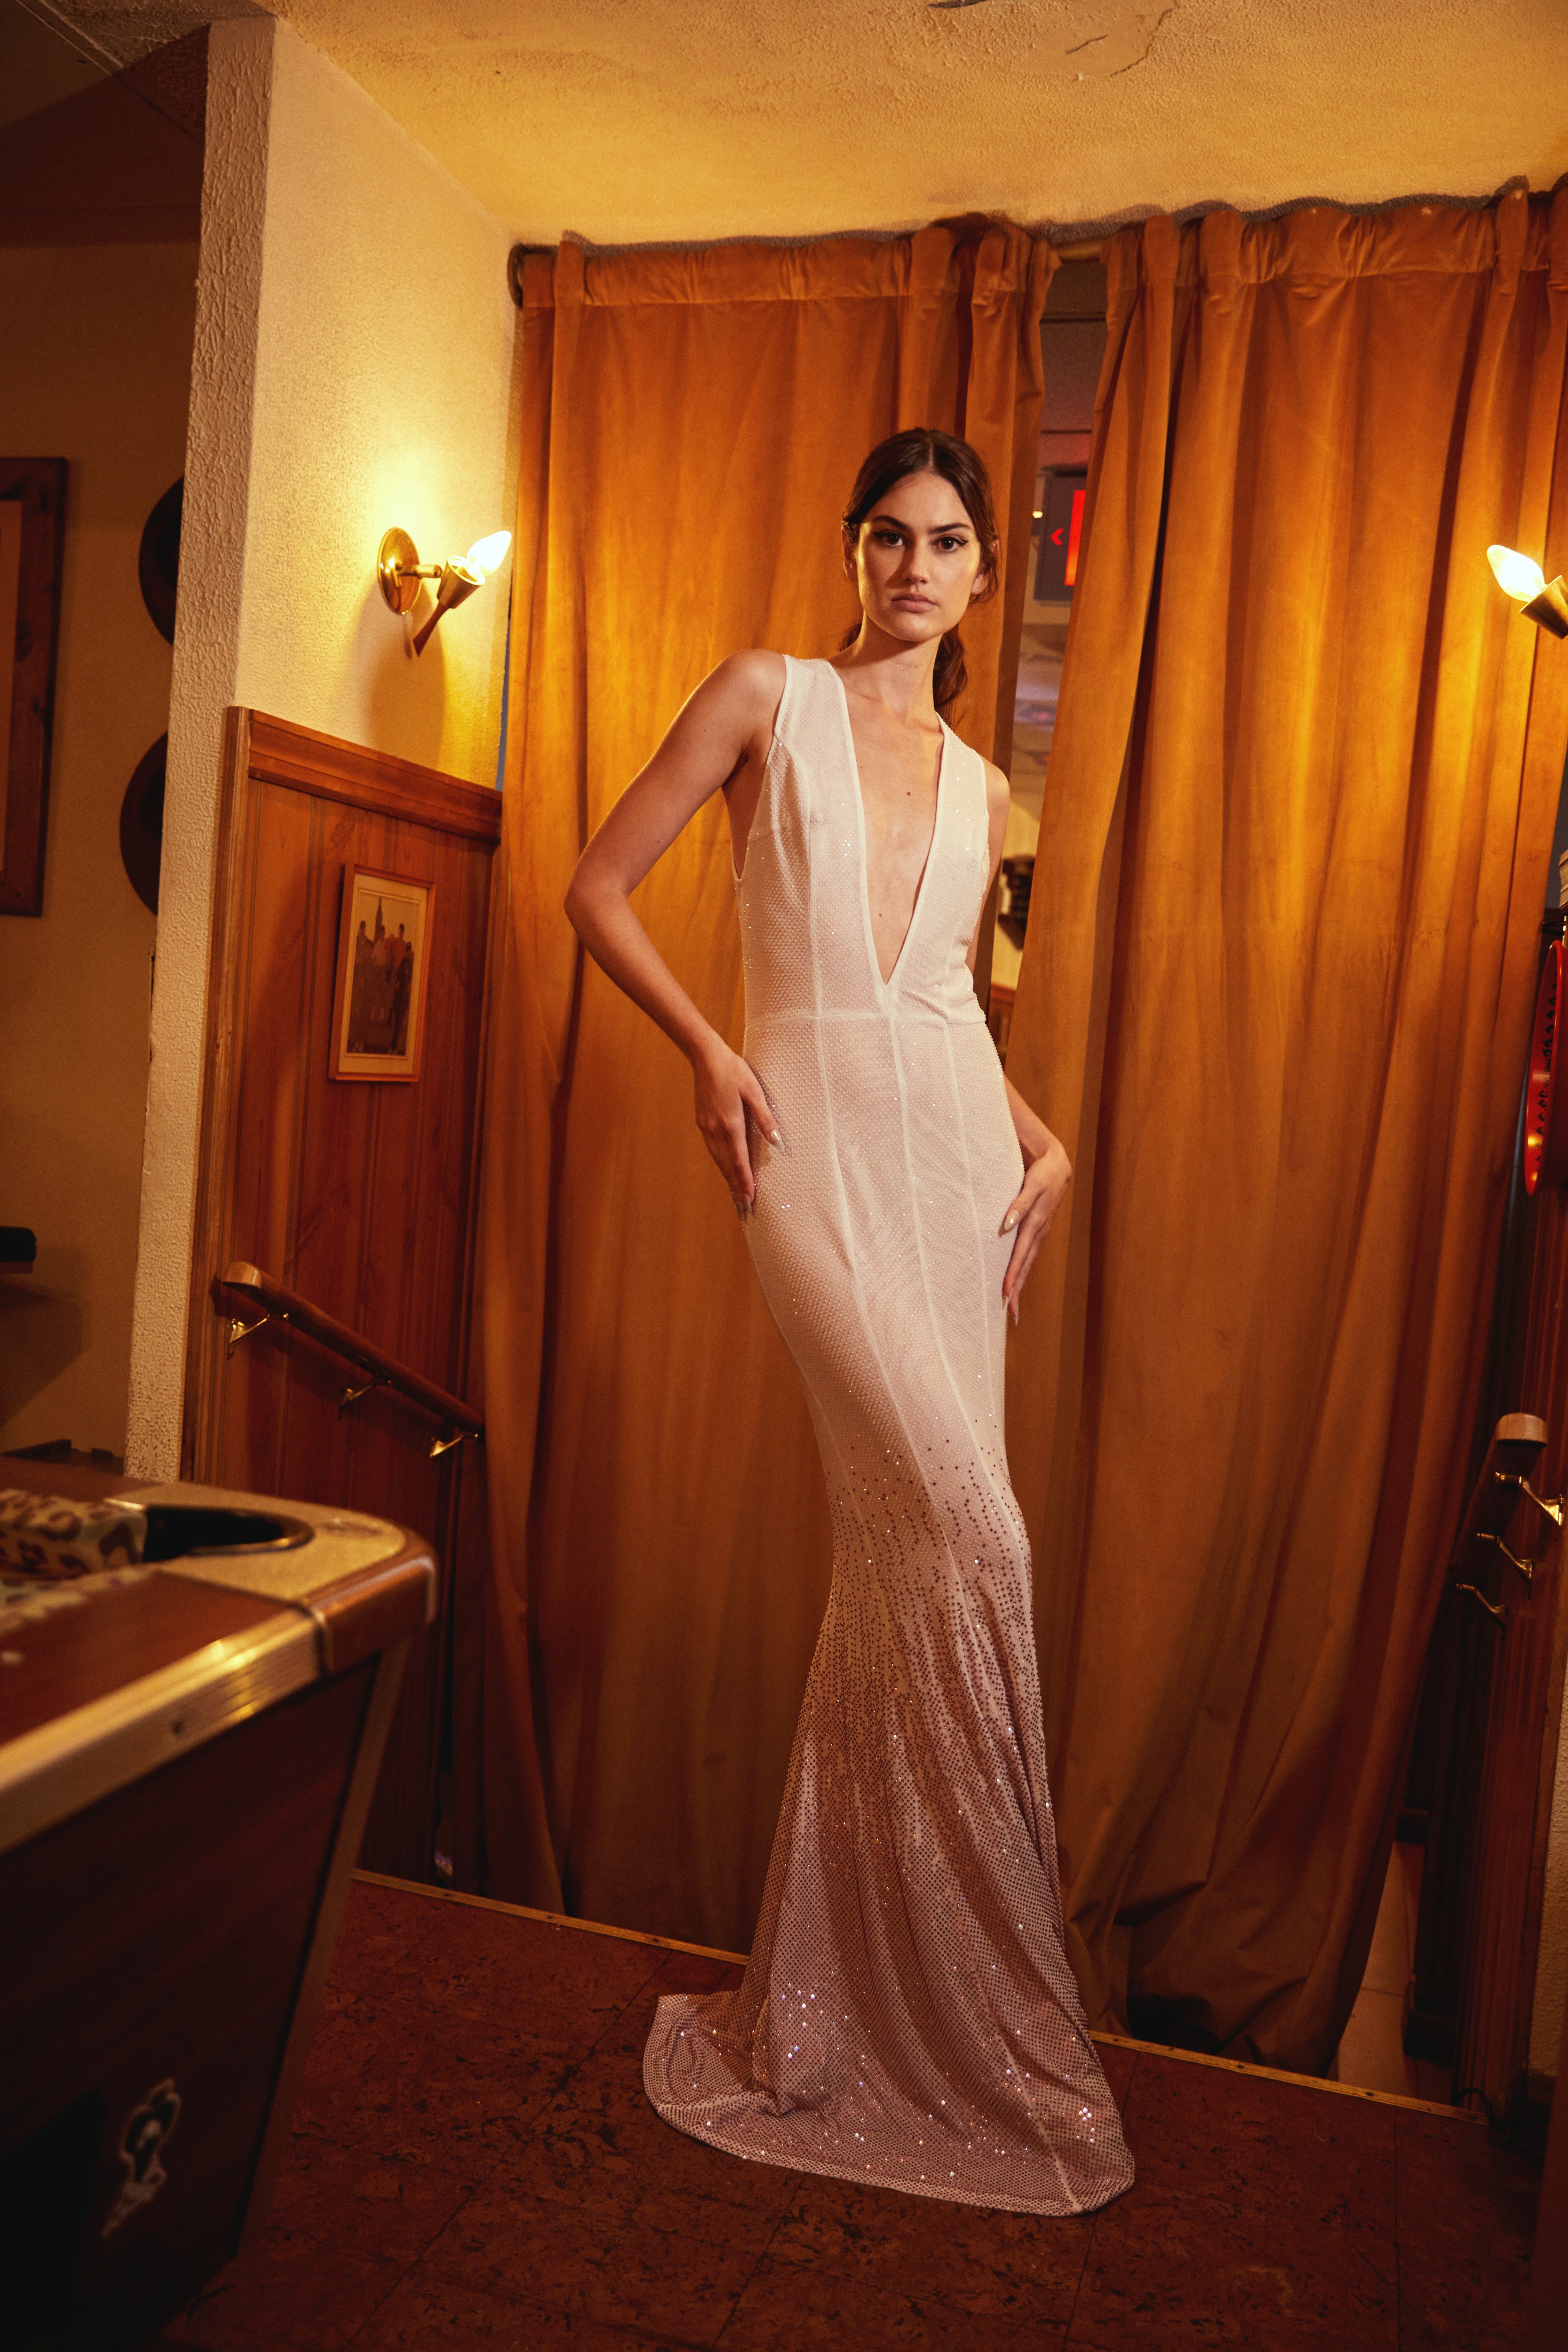 Look Sixteen: Crystal Ombre V Neck Gown